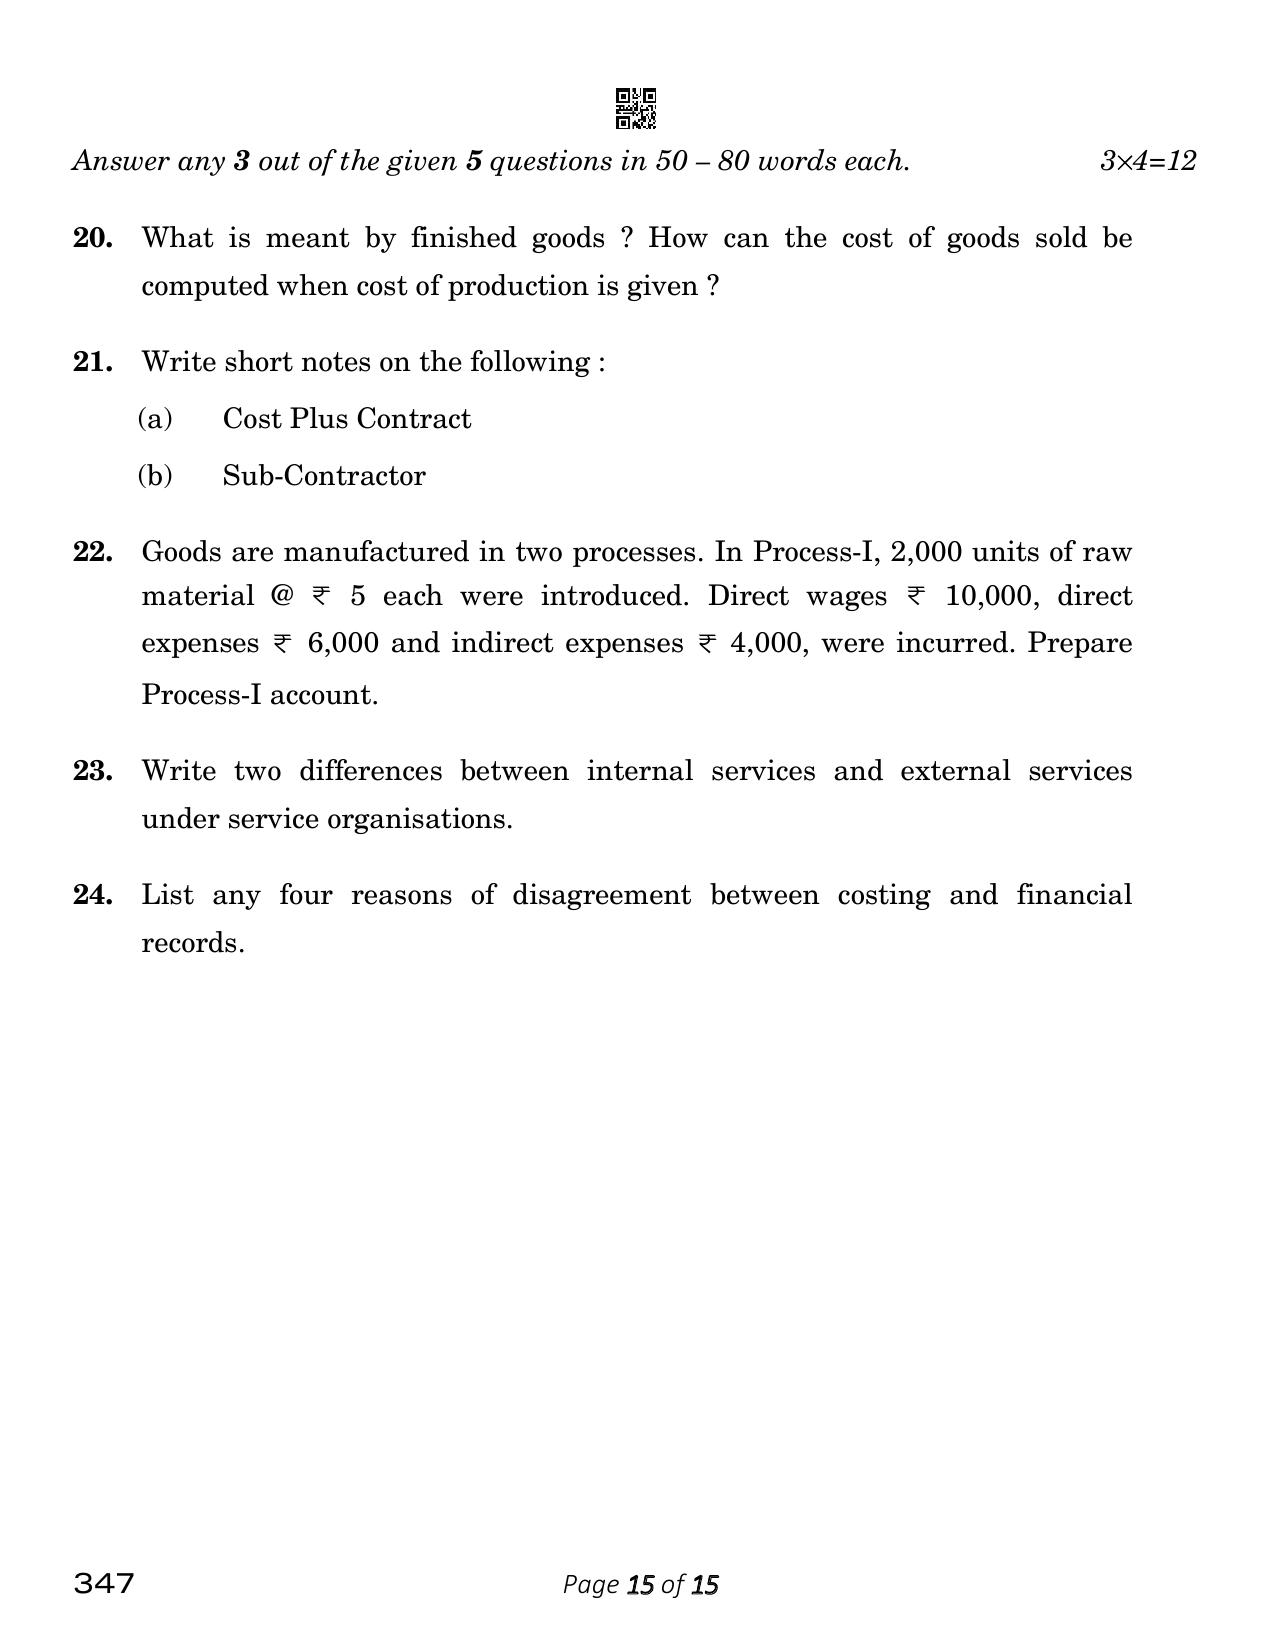 CBSE Class 12 Cost Accounting (Compartment) 2023 Question Paper - Page 15